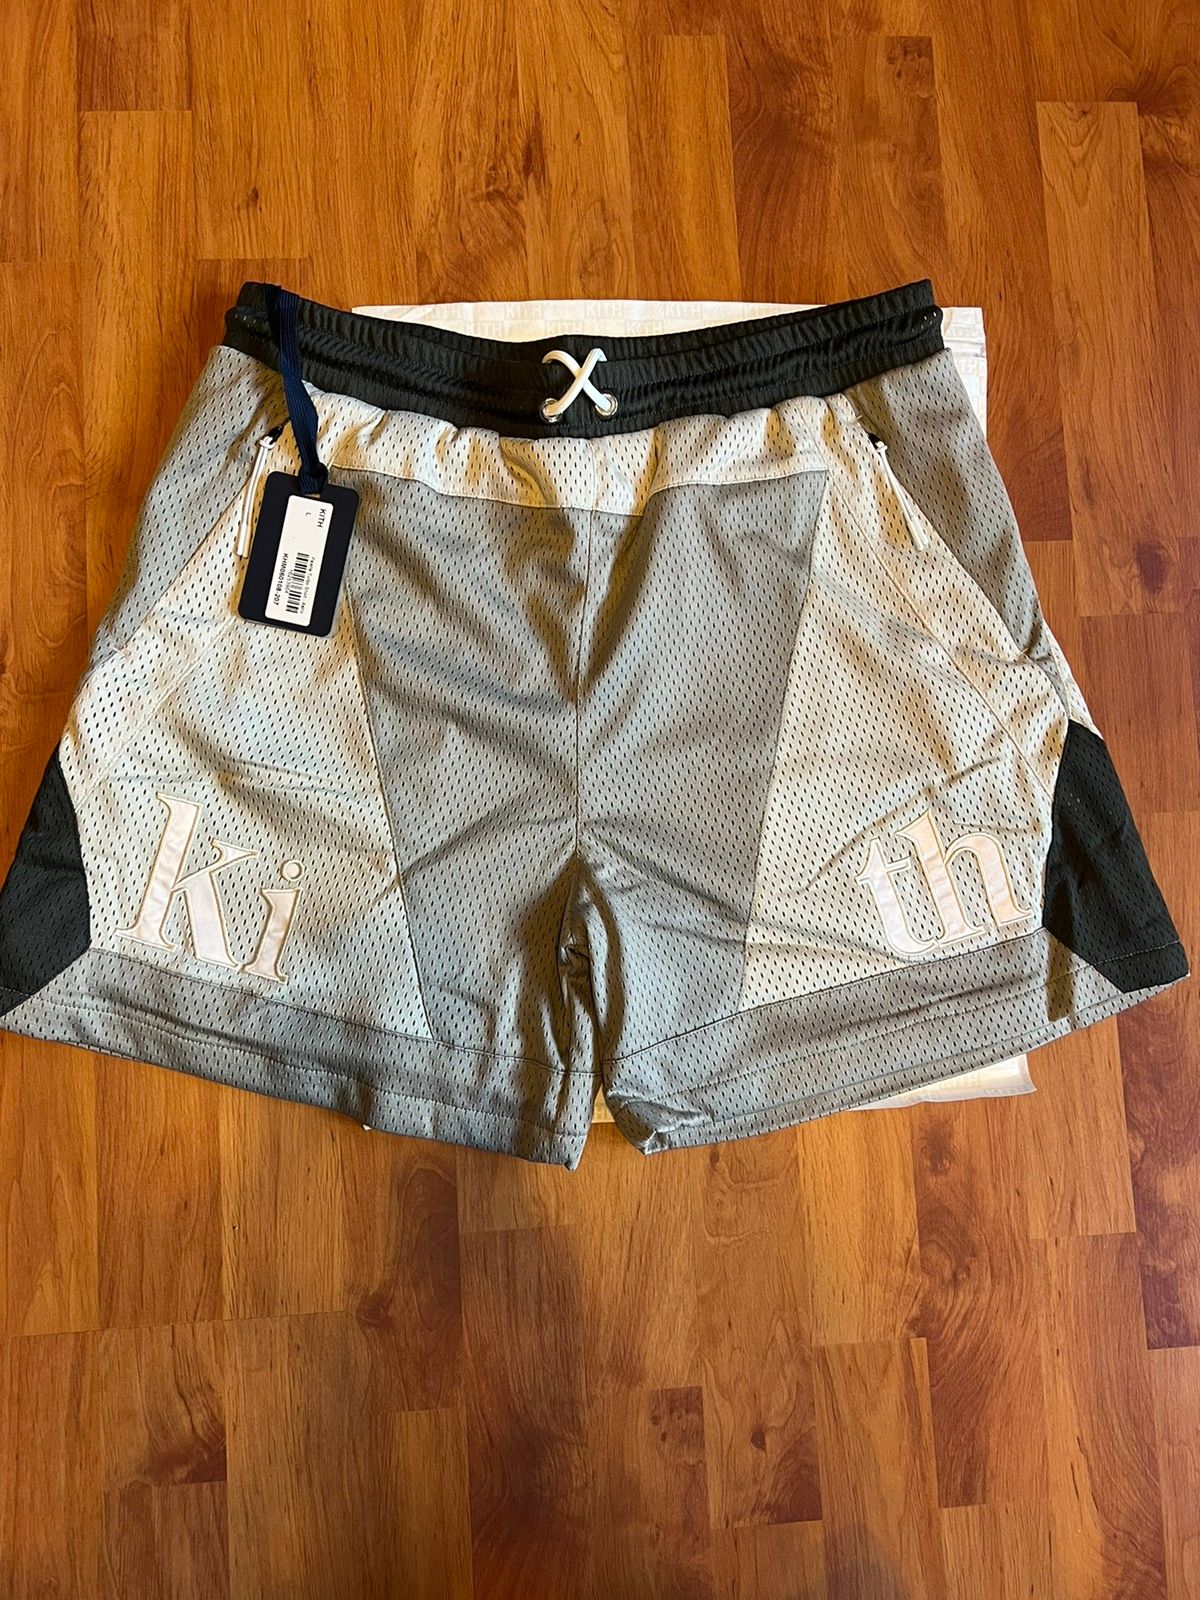 Kith Palette Turbo Short Rogue